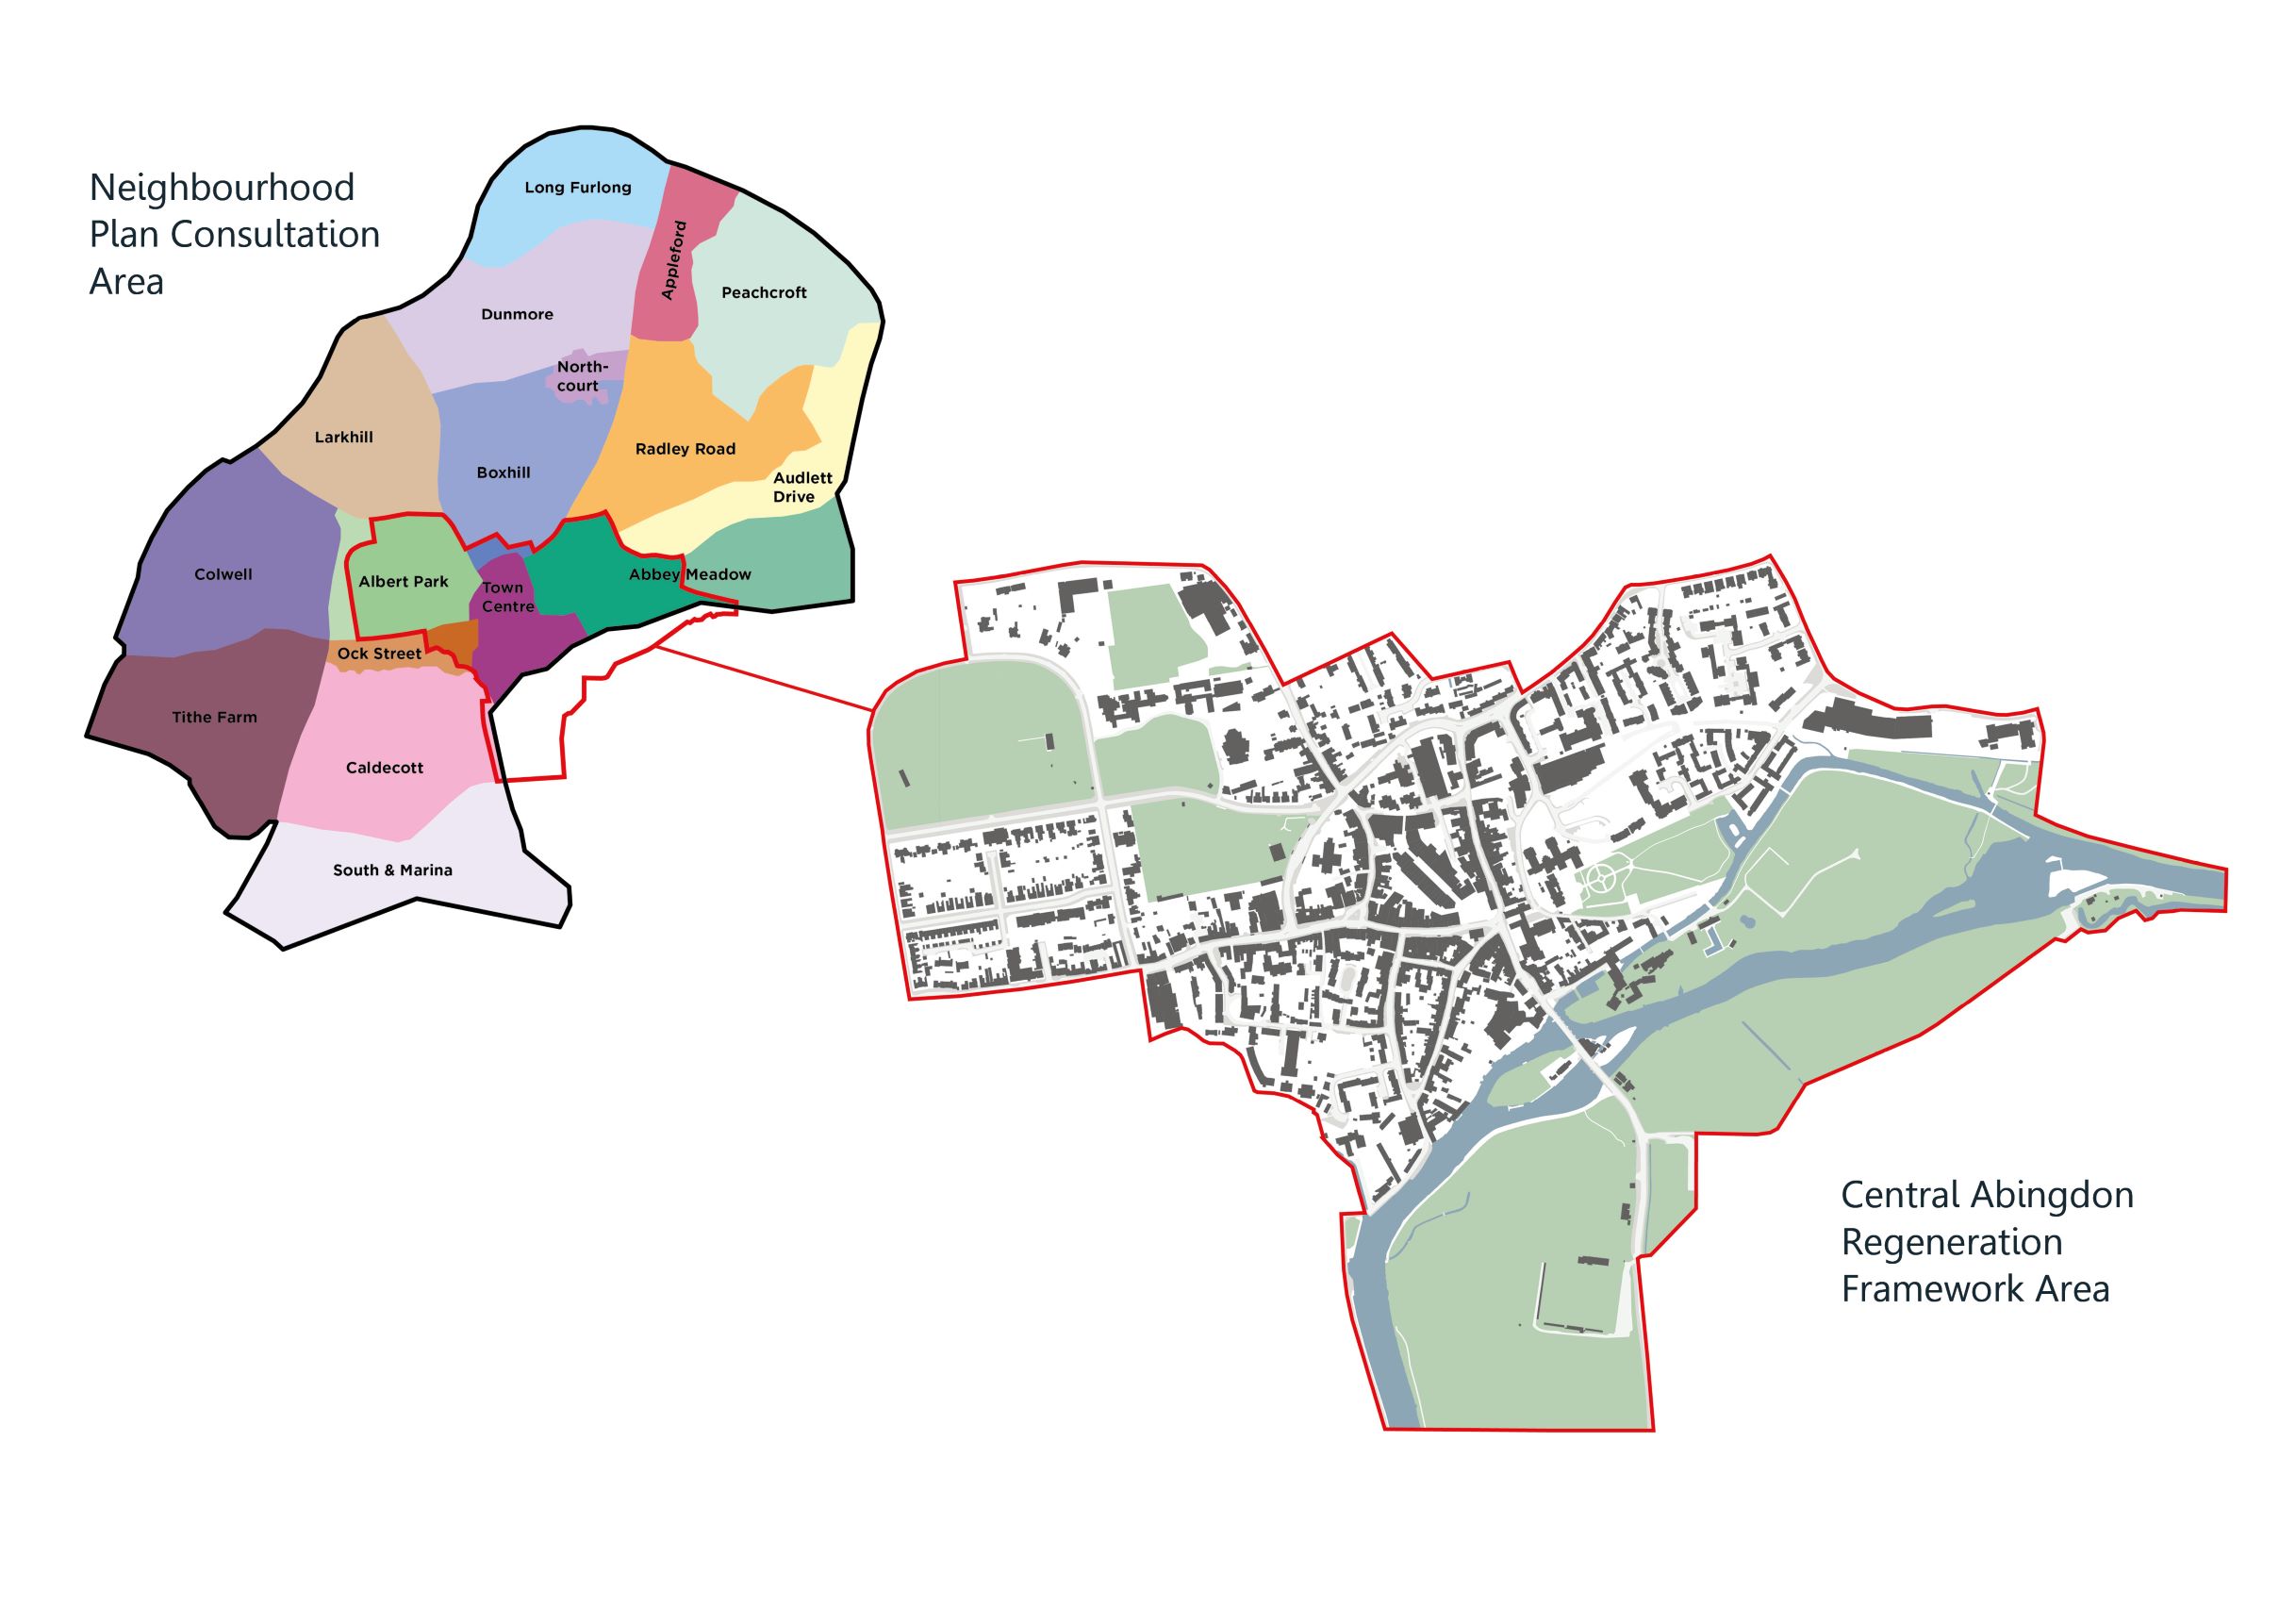 A plan illustrating the study area of the CARF in the context of the Neighbourhood Plan Consultation area. The Neighbourhood Plan study area includes all residential and suburban areas of Abingdon whereas the CARF focuses on the town centre area and its immediate surroundings only, including parts of Albert Park, Ock Street, Abbey Meadow and Boxhill, alongside open space south of the River Thames.